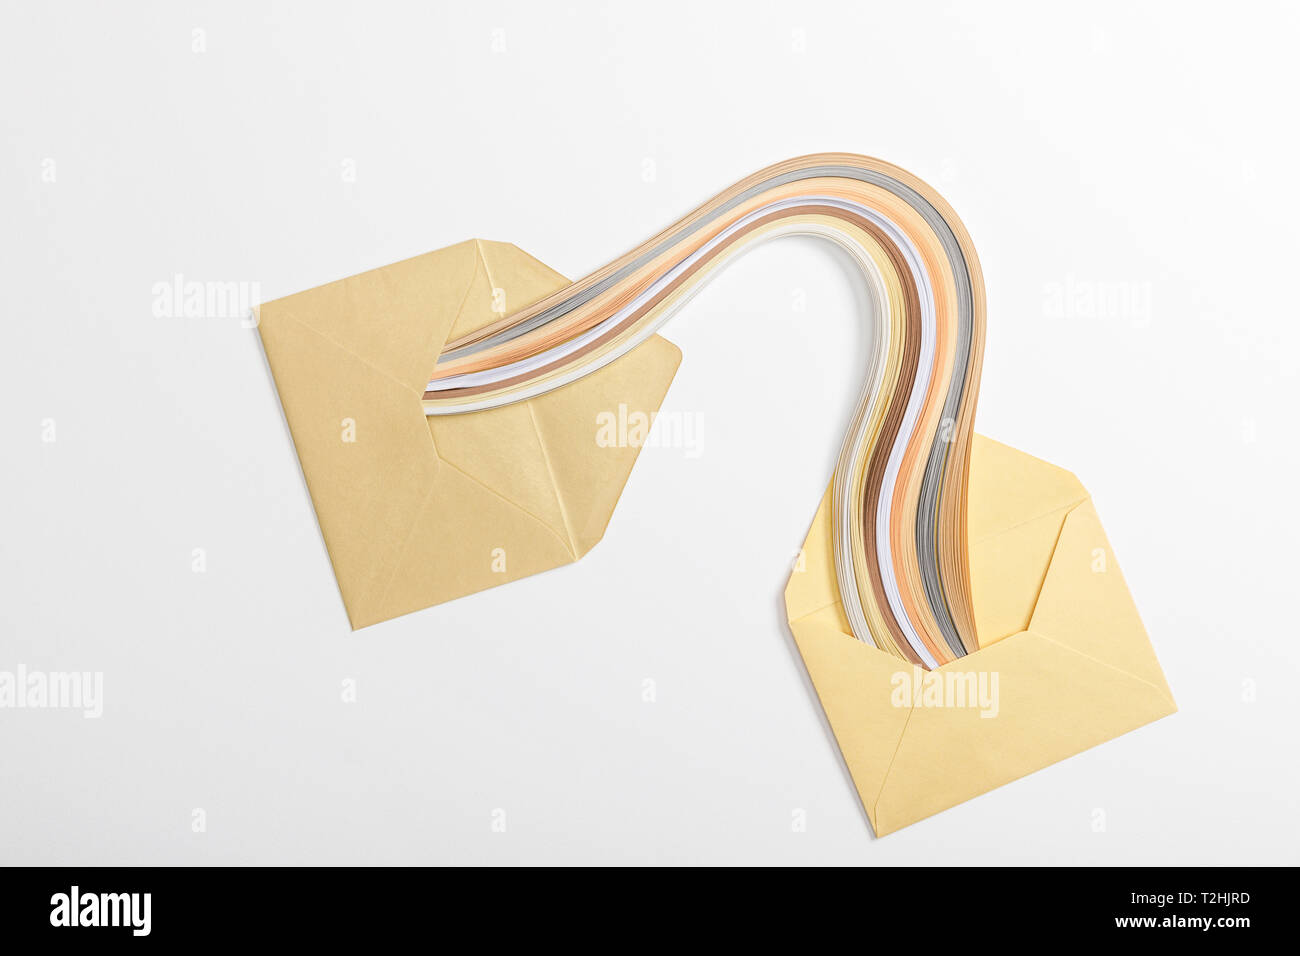 Download Top View Of Yellow Envelopes With Multicolored Rainbow On Grey Background Stock Photo Alamy PSD Mockup Templates